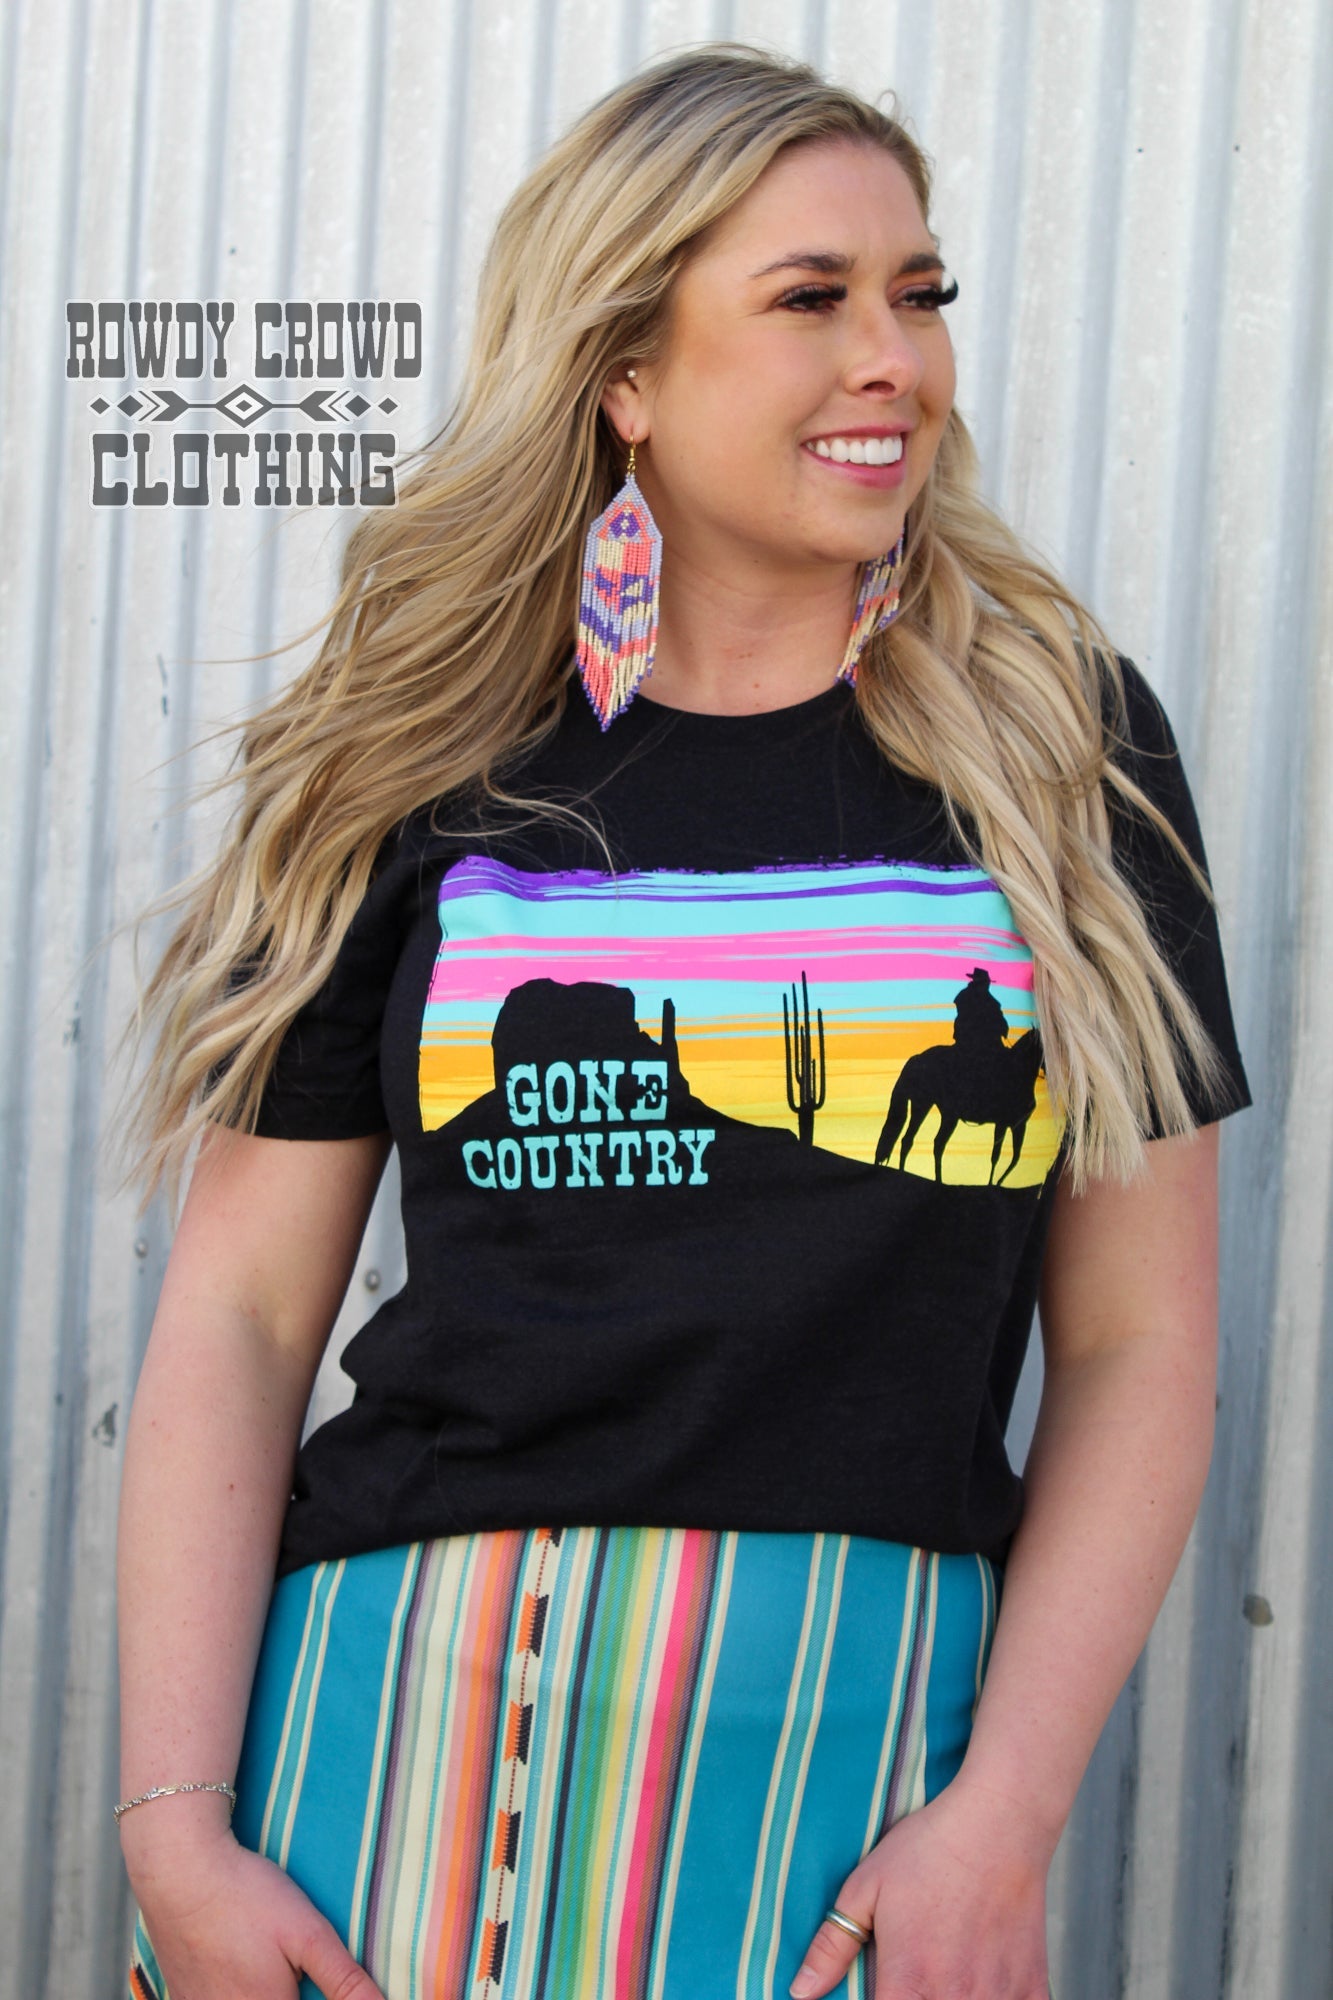 Western Graphic Tee, Western Wholesale, Wholesale Clothing, Western Boutique, Gone Country, Gone Country Tee, Western Apparel, Western Fashion